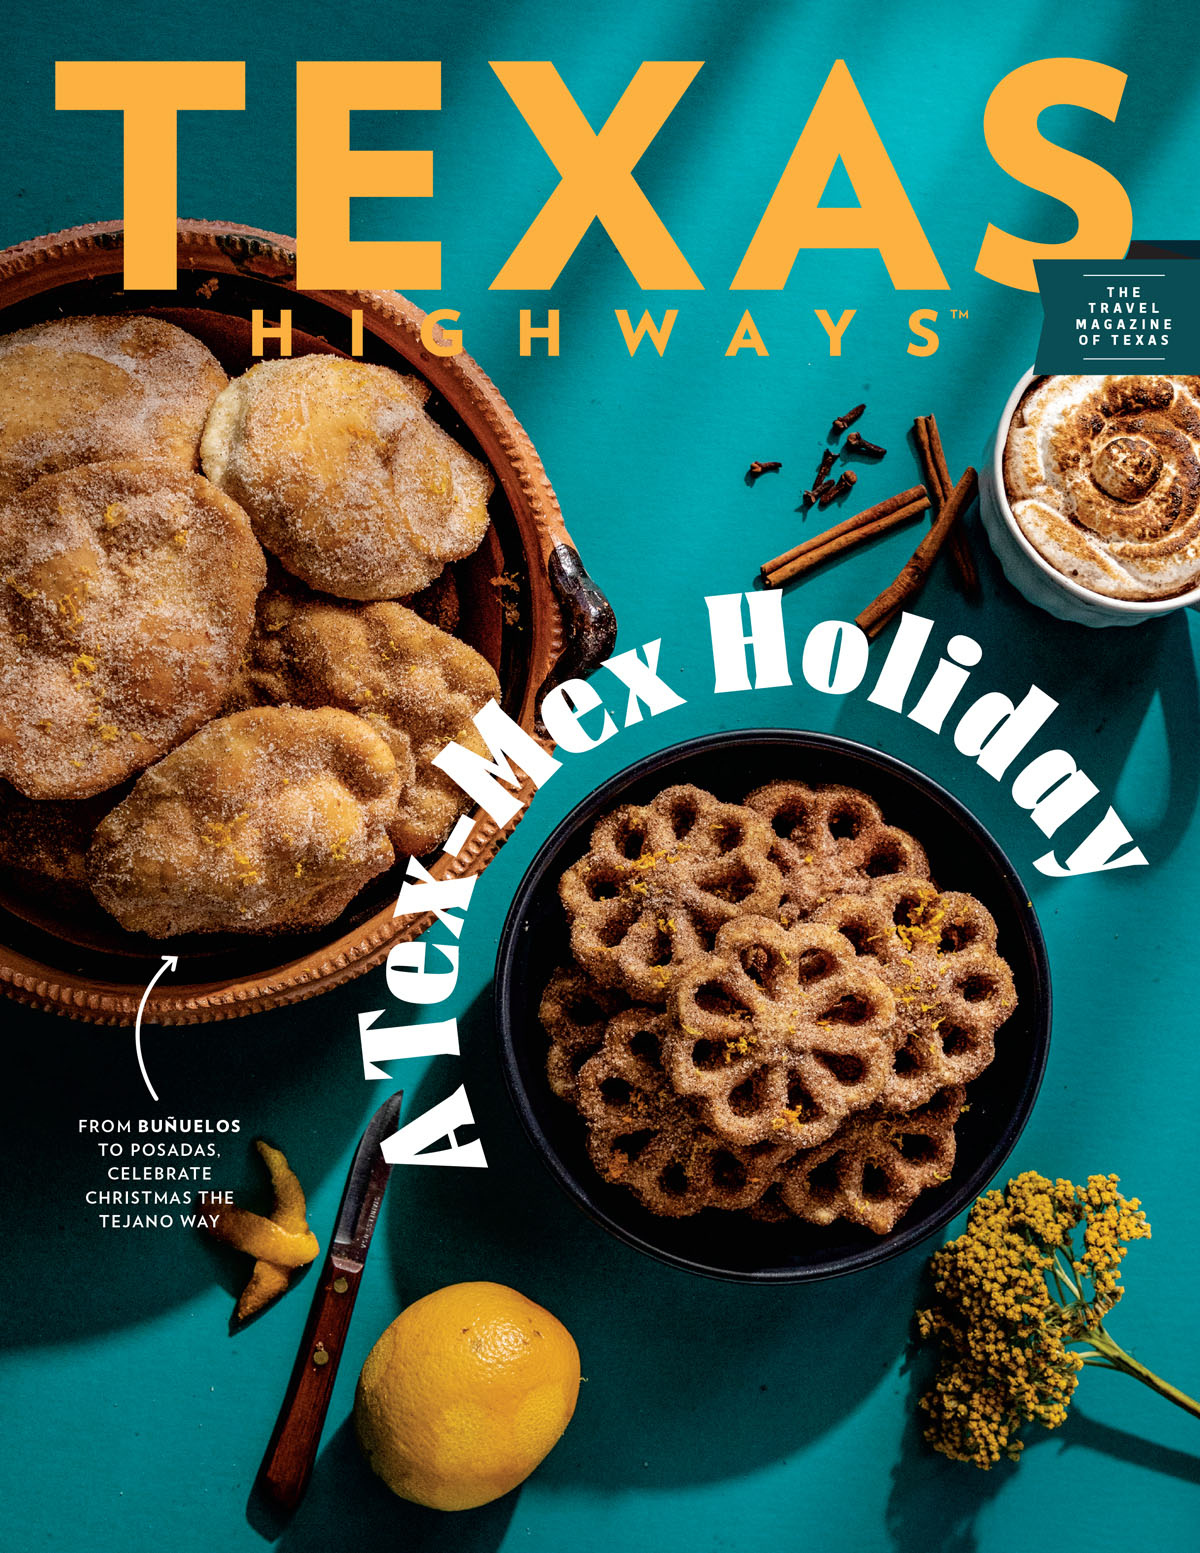 The December 2022 issue of Texas Highways Magazine